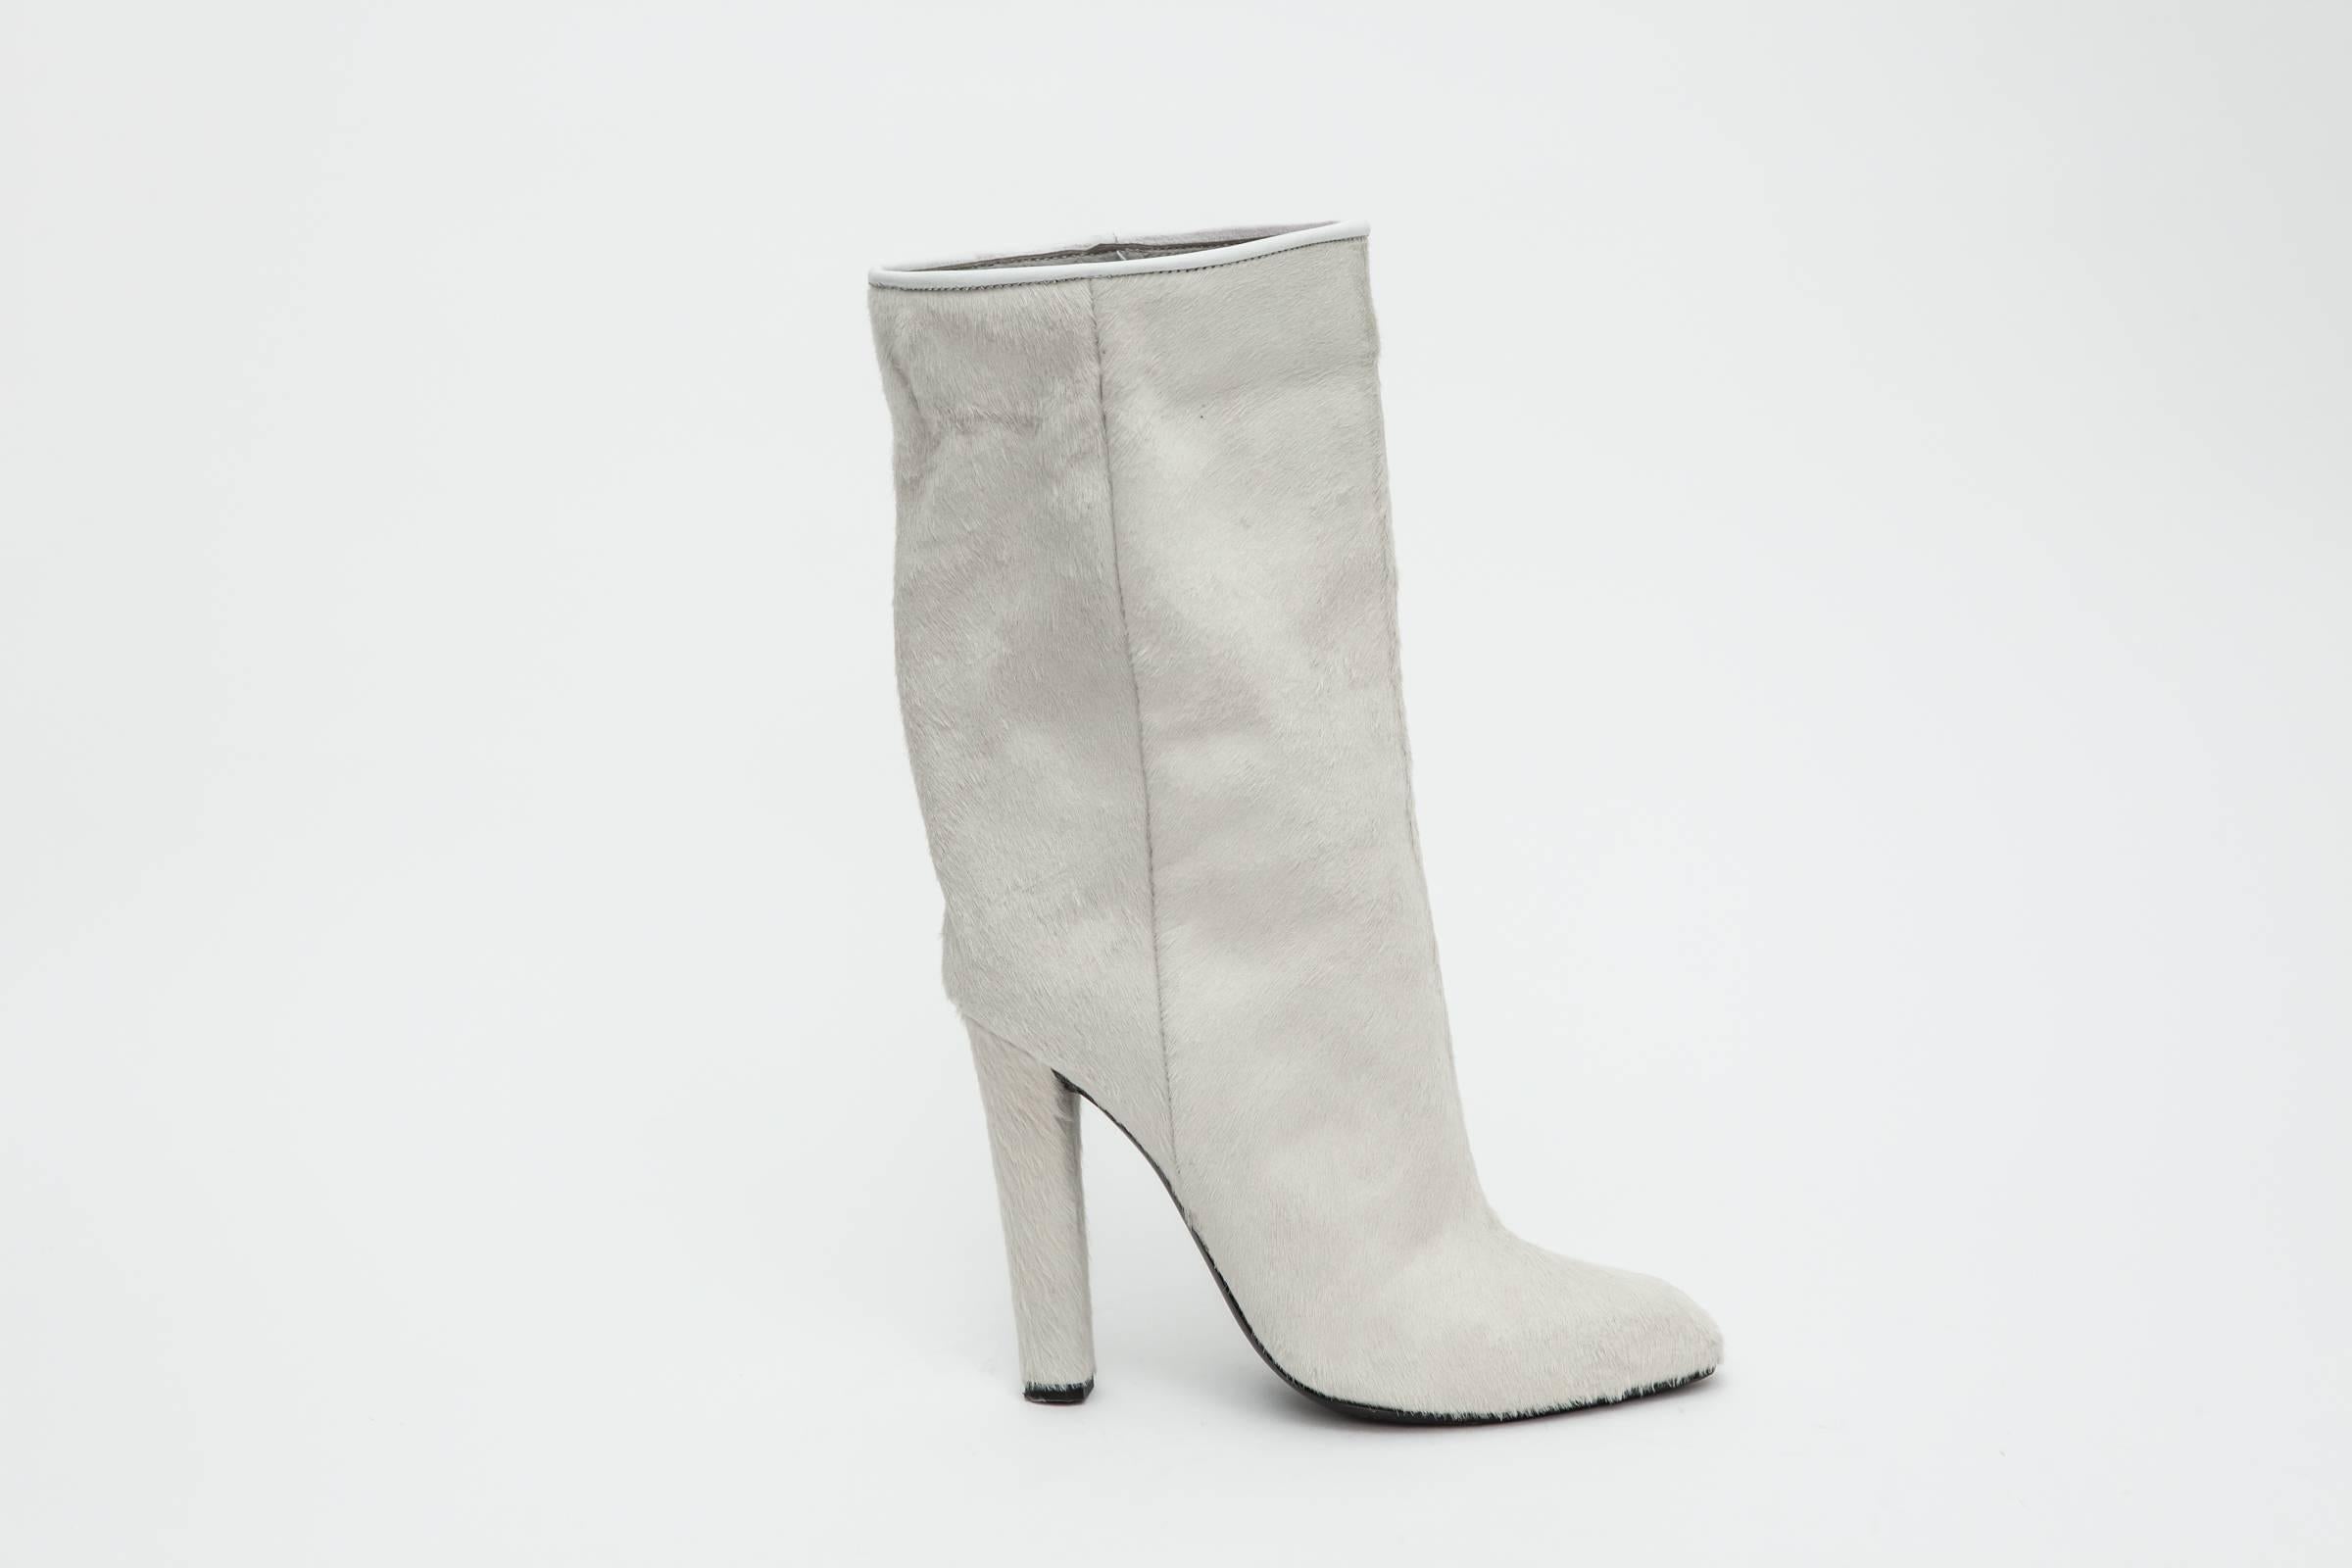 Mid-calf ivory pony skin boots with 4" heel and inner zip closure.